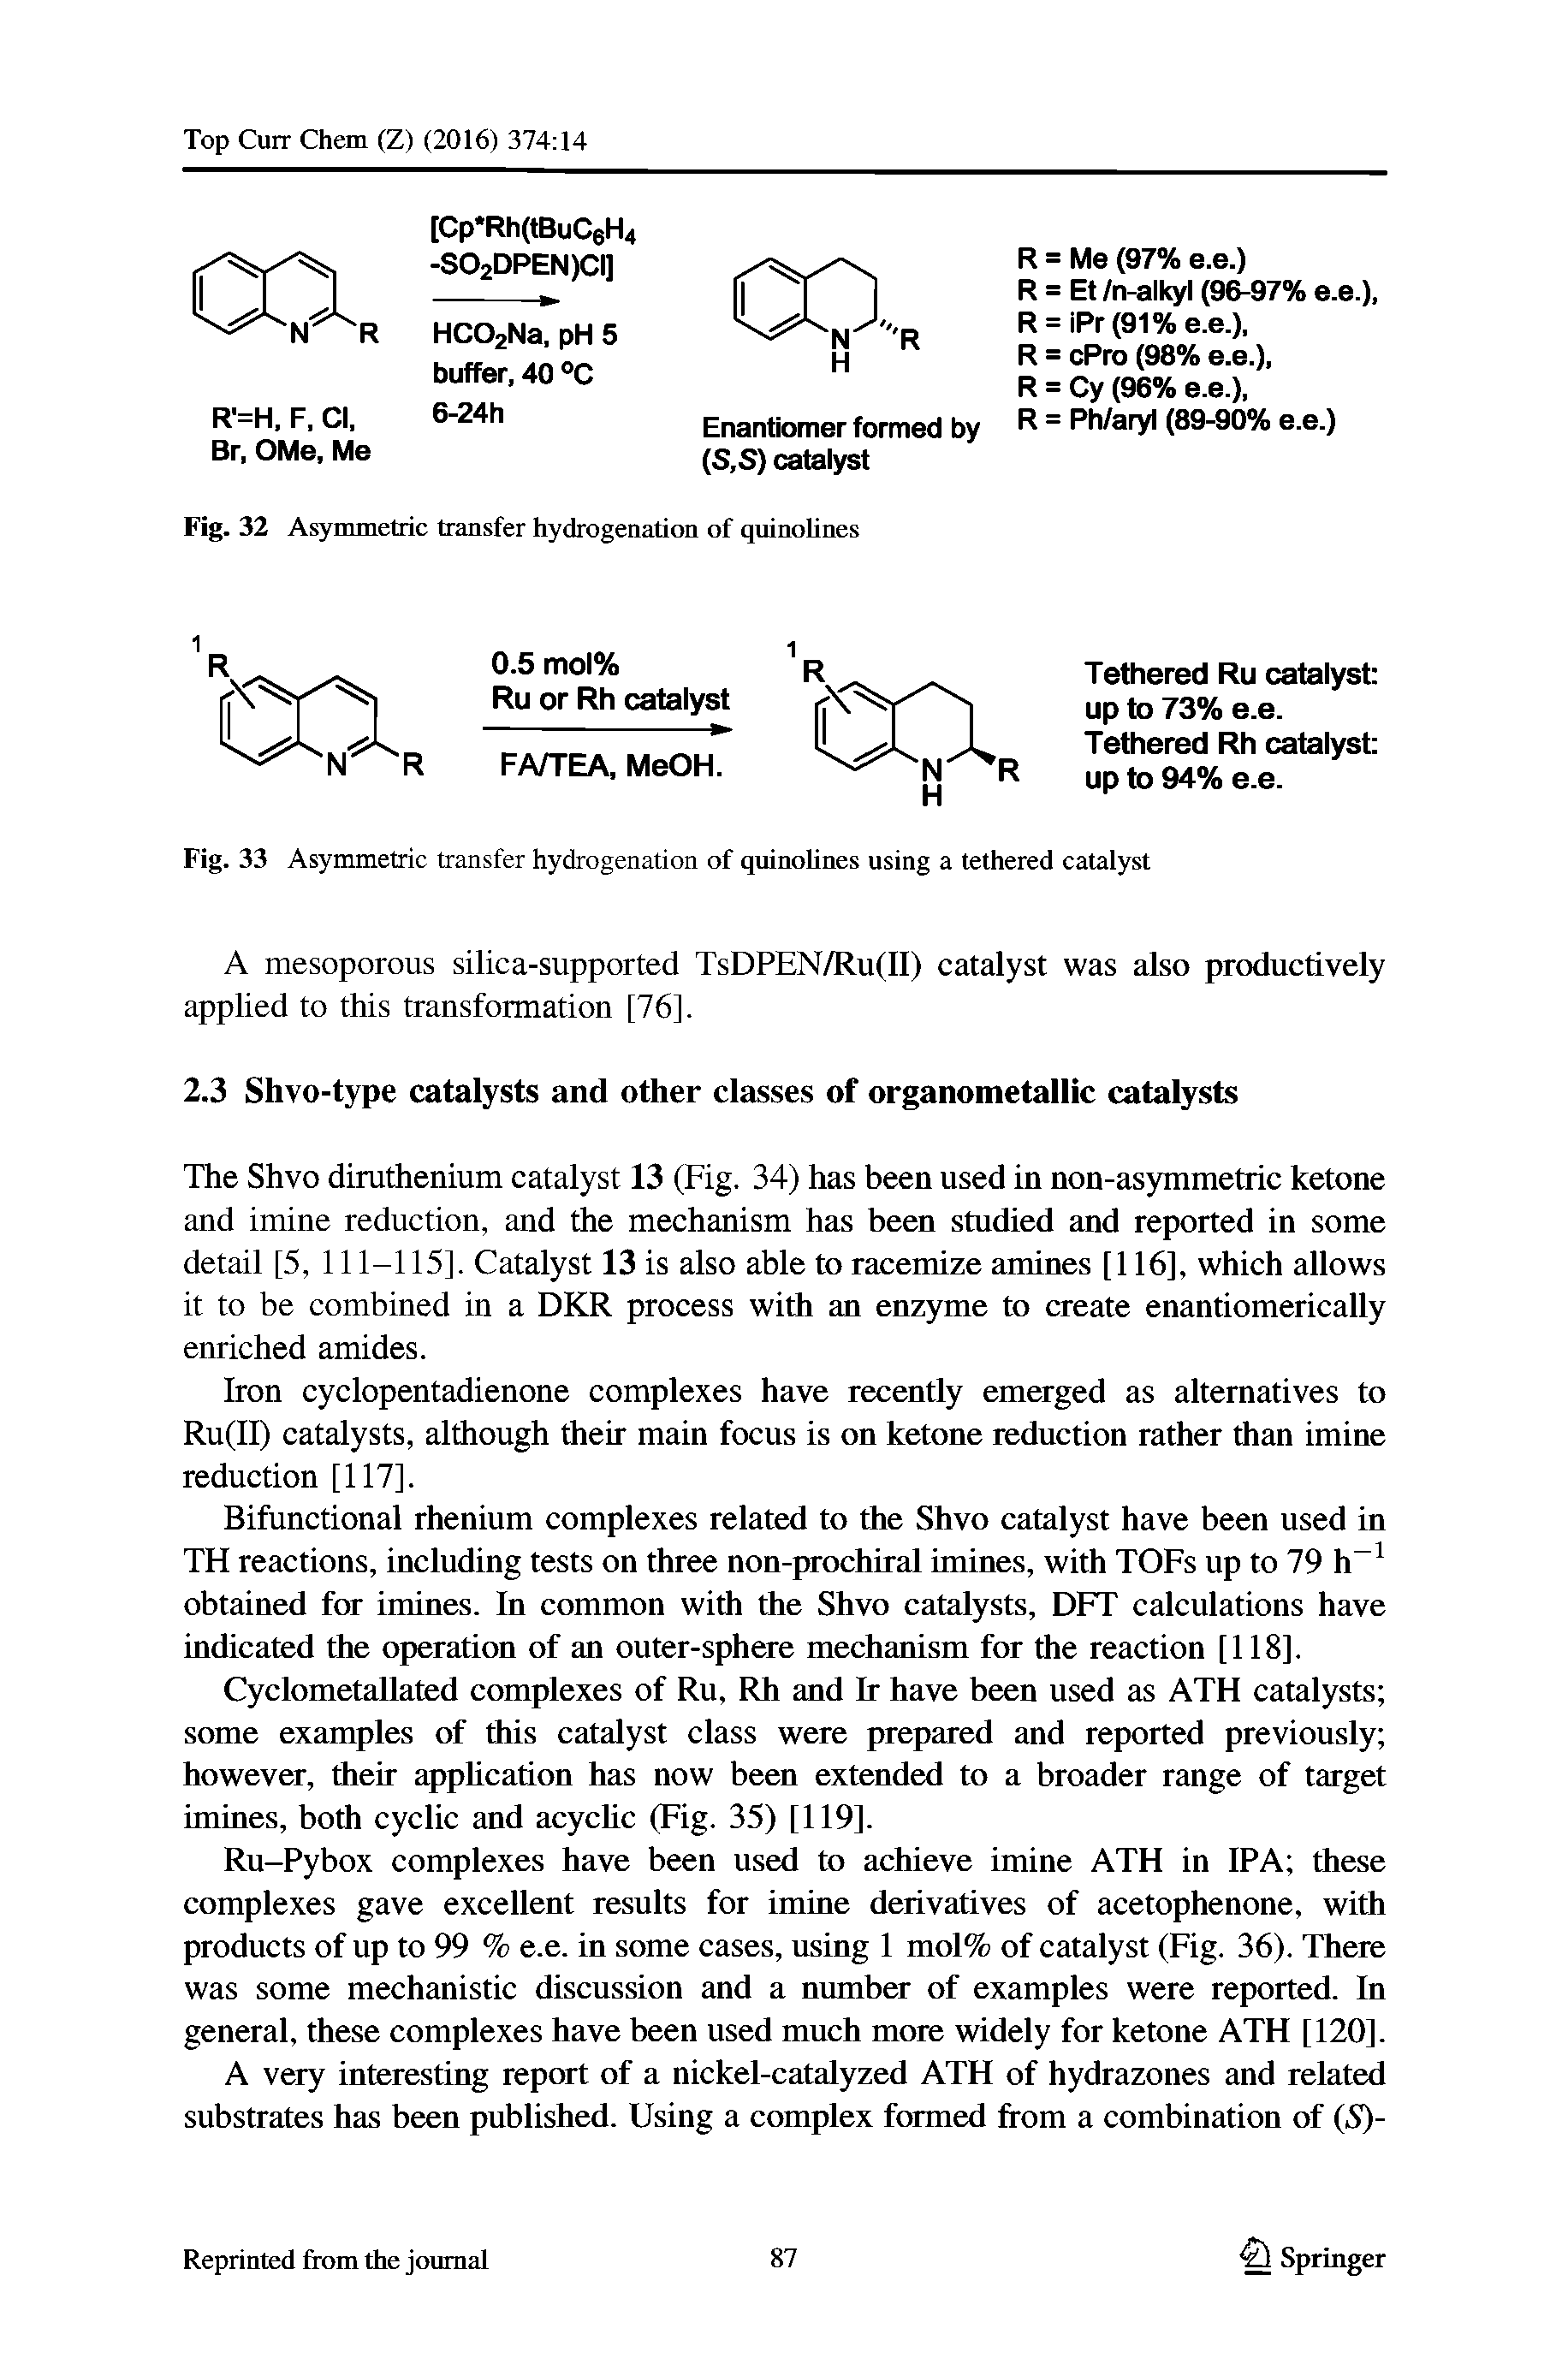 Fig. 33 Asymmetric transfer hydrogenation of quinolines using a tethered catalyst...